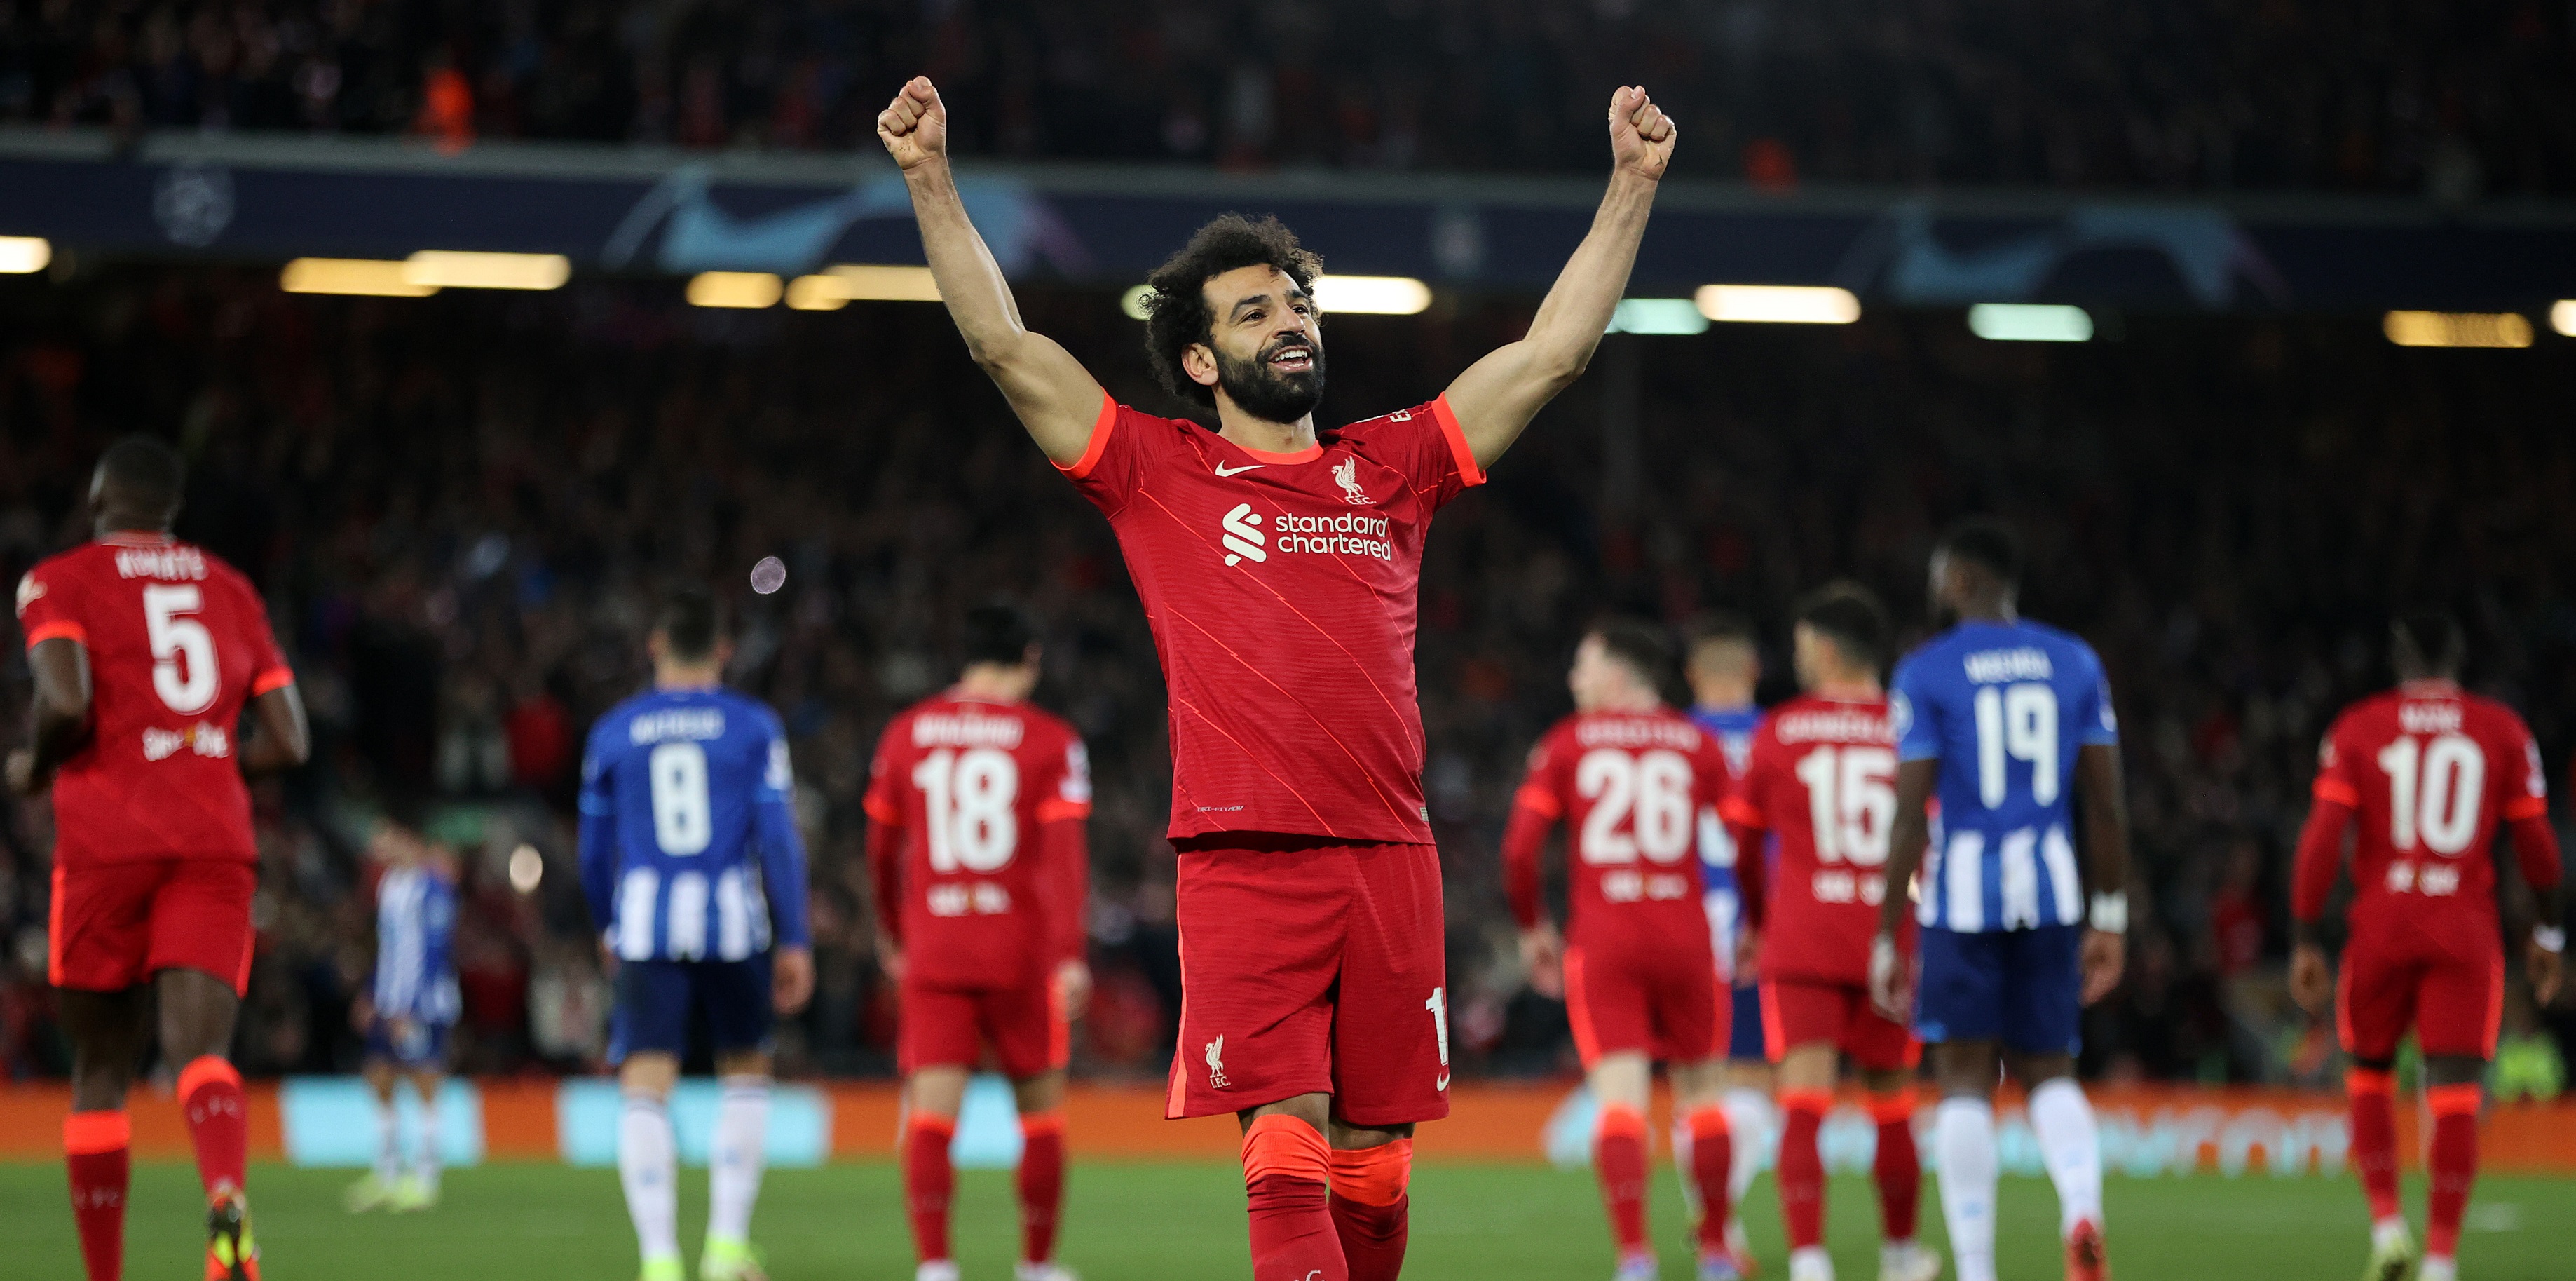 Ian Rush sets Mo Salah a new challenge and reveals what he told the Egyptian King prior to the signing of his new Liverpool contract